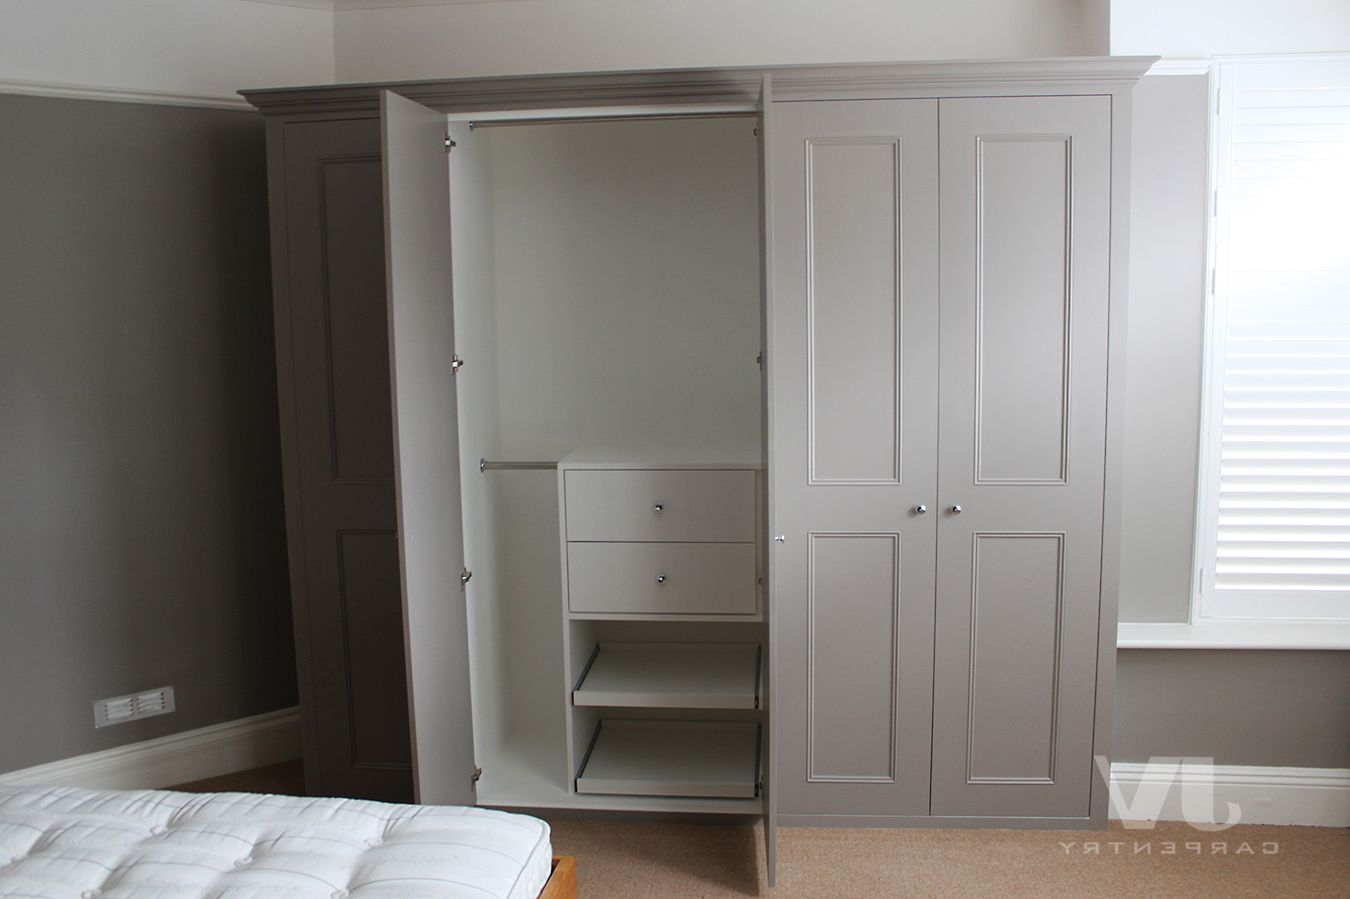 14 Grey Fitted Wardrobes Ideas For Your Bedroom | Jv Carpentry With Grey Wardrobes (View 3 of 20)